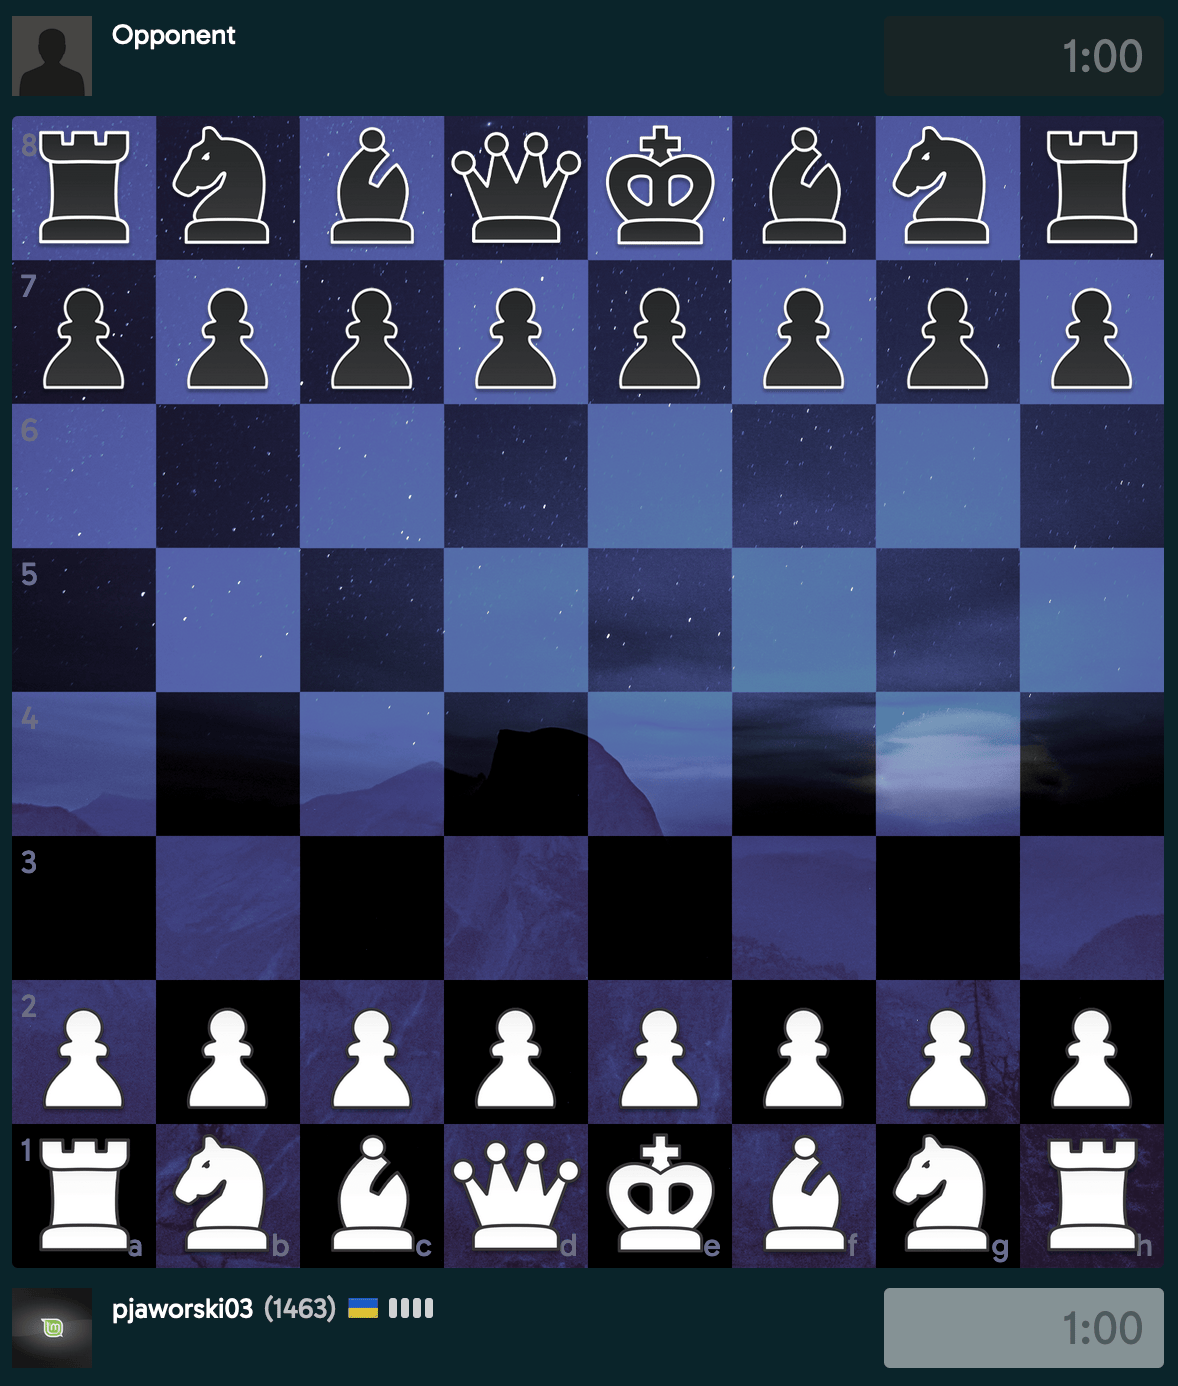 Playing on chess.com using Chess Master chrome extension 